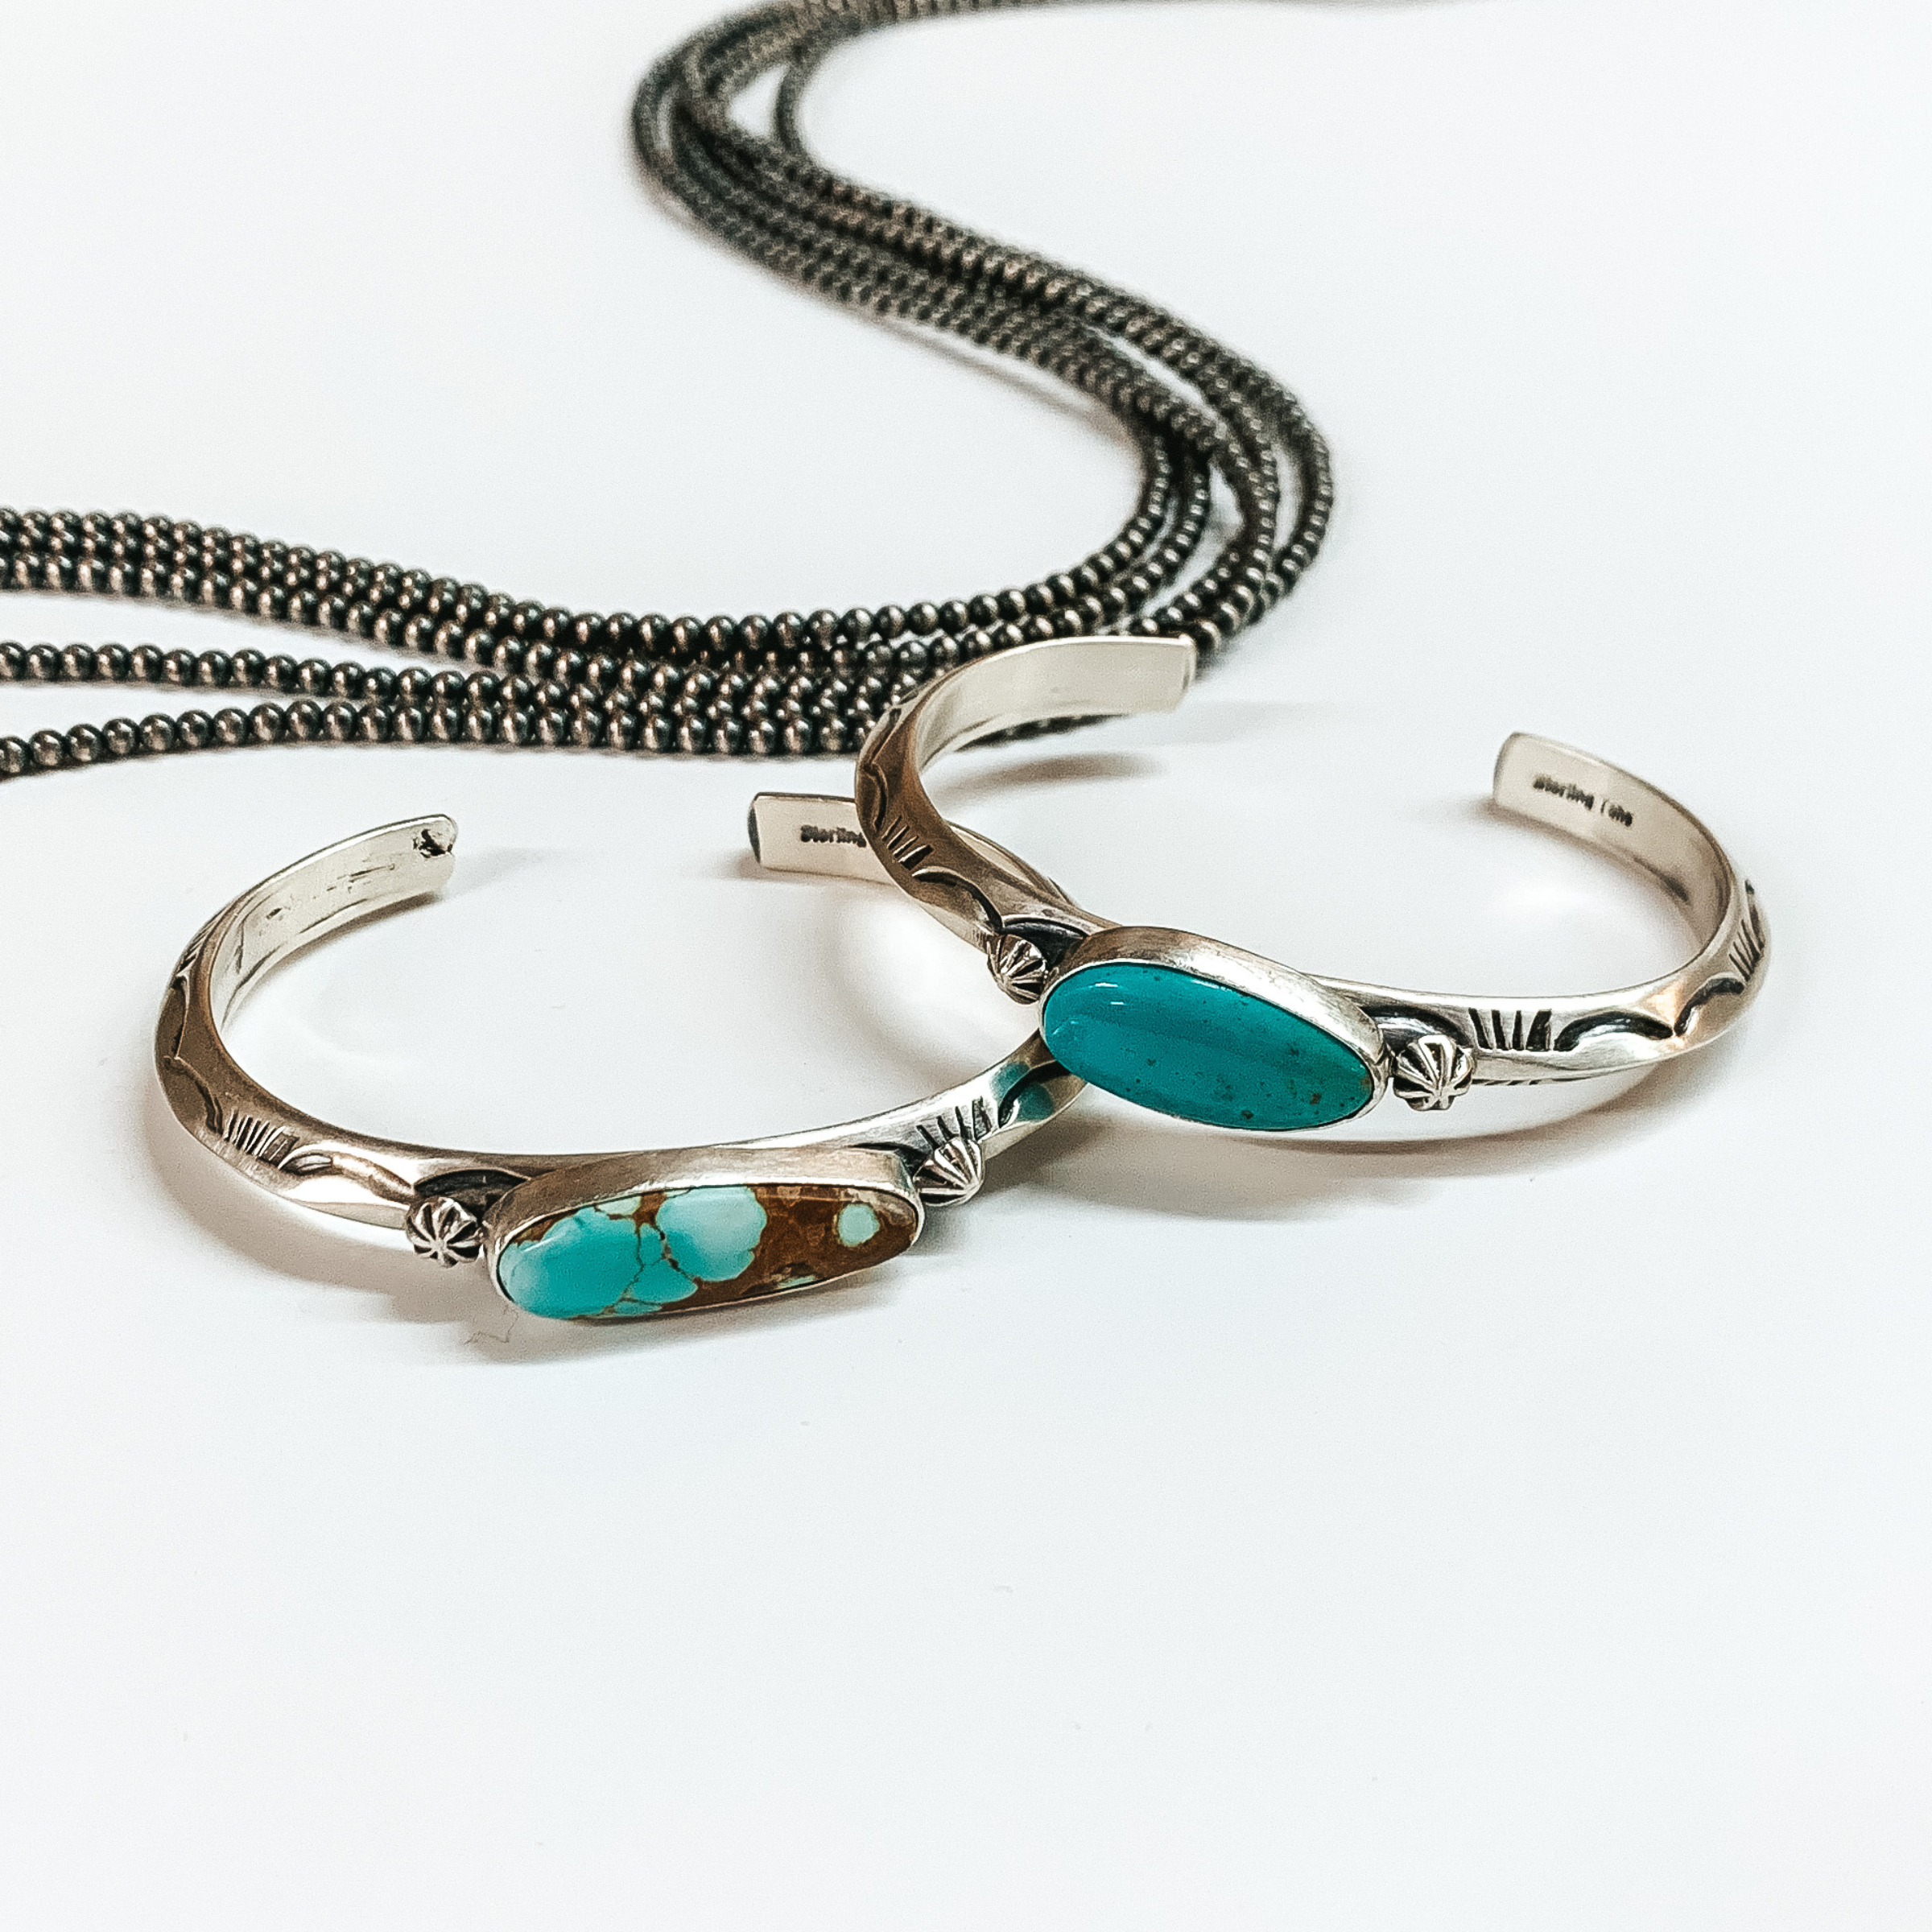 Two silver cuff bracelets with engraved details and a center turquoise stone. These bracelets are pictured on a white background with silver beads at the top. 